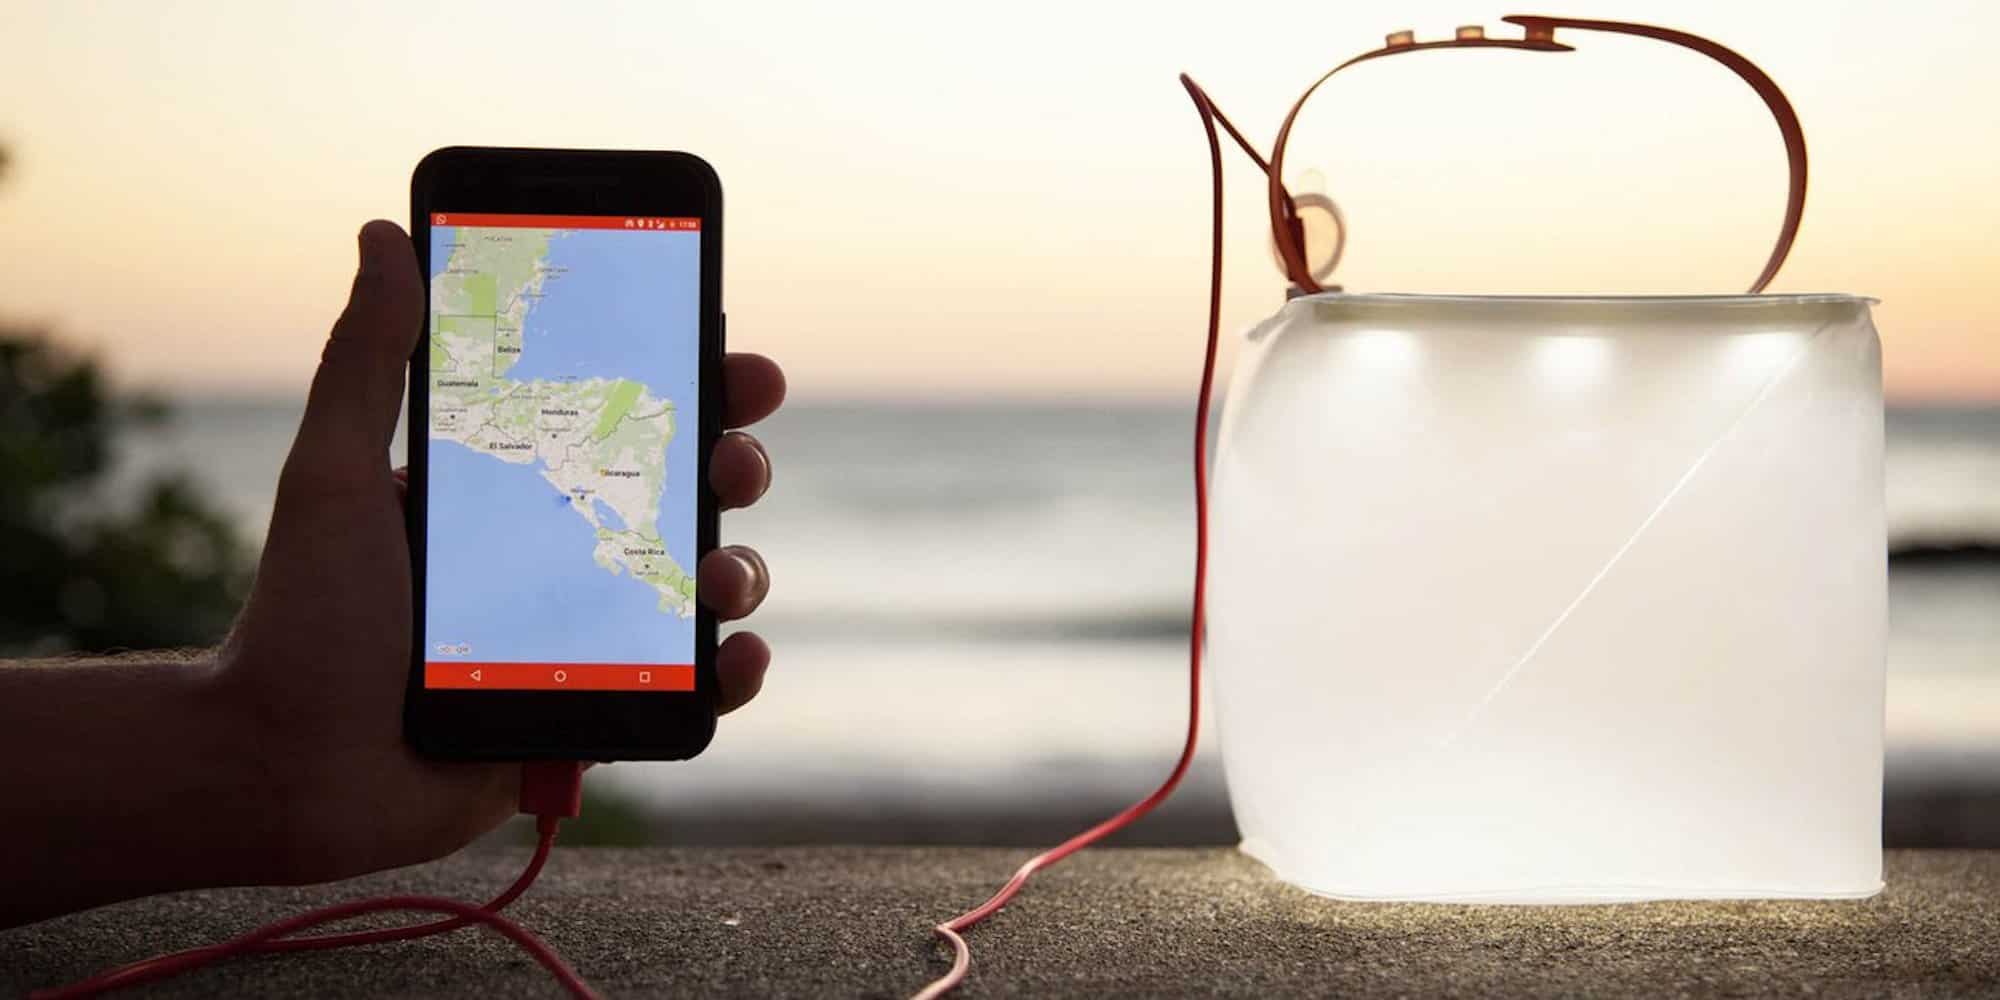 The LuminAid PackLight solar lantern floats in water and charges your phone.